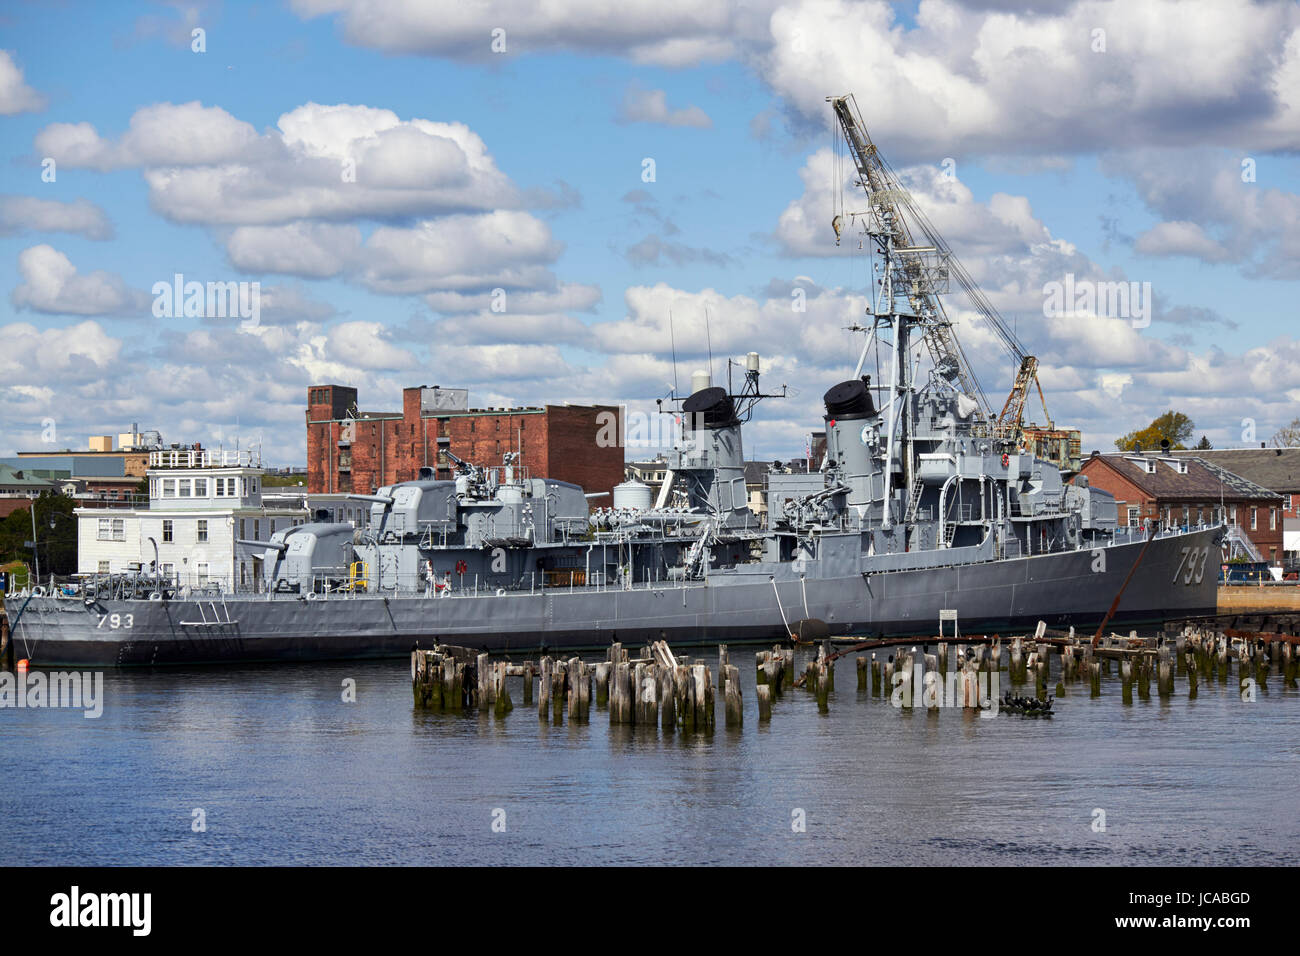 USS Cassin Young jj-793 boston Charlestown Navy Yard Boston USA Banque D'Images